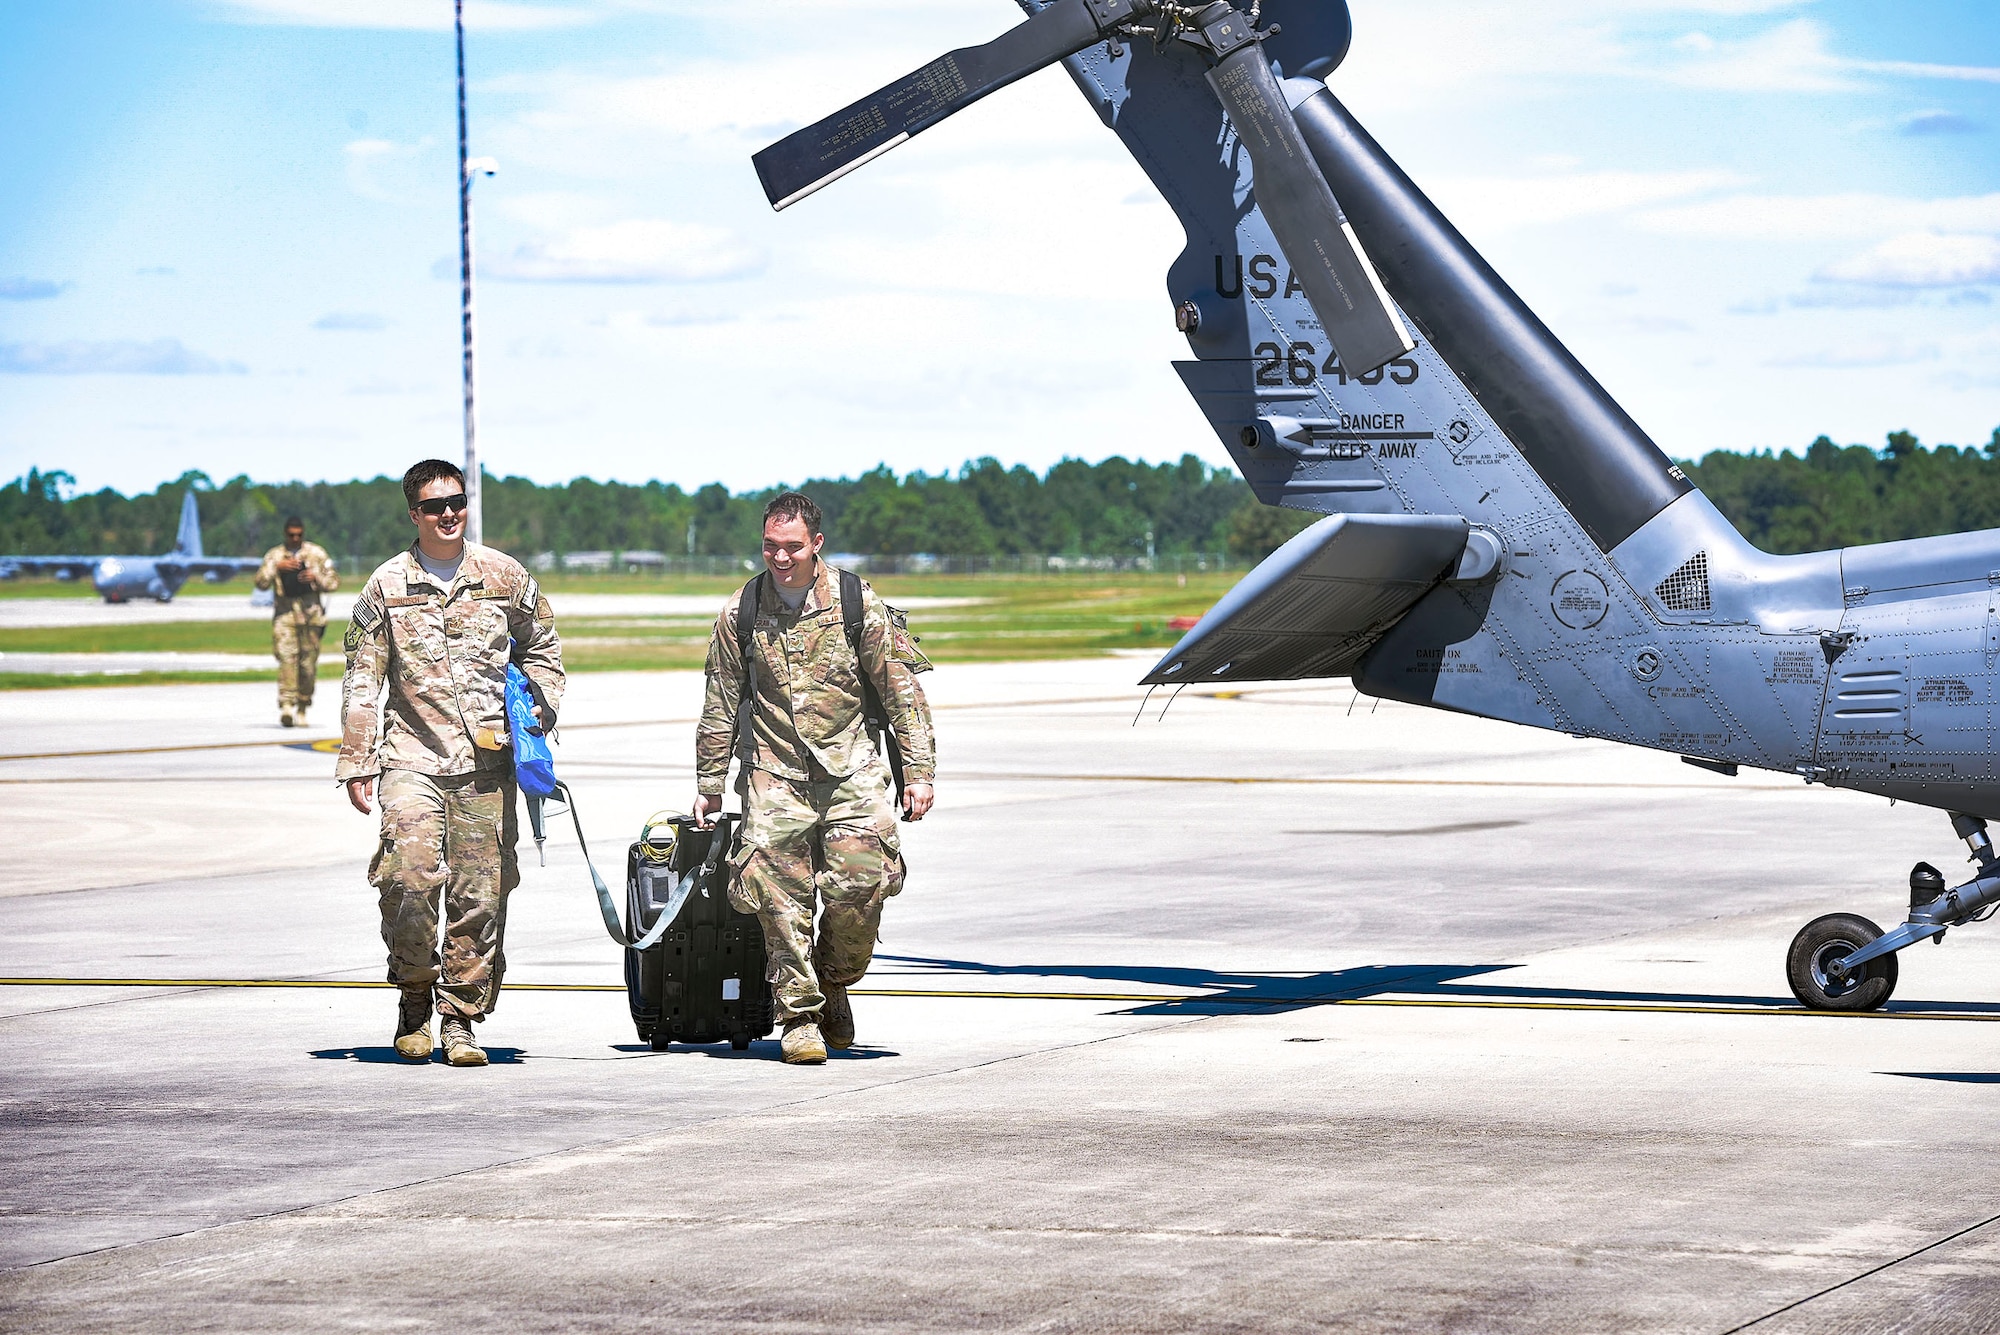 Airmen from the 41st Helicopter Maintenance Unit advance towards an HH-60G Pavehawk helicopter to perform maintenance, Sept. 15, 2018, at Moody Air Force Base, Ga. The 334th Air Expeditionary Group launched HC-130J Combat King IIs, HH-60G Pavehawks, aircrew and support personnel to pre-position at Joint Base Charleston, S.C., for potential Tropical Storm Florence response. Under the command of Col. John Creel, the 374th Rescue Group commander, the AEG integrated to make one expeditionary search and rescue unit comprised of rescue and support personnel from both the 23d Wing, 920th Rescue Wing at Patrick Air Force Base, Fla., and 51st Combat Communications Squadron at Robins Air Force Base, Ga. (U.S. Air Force photo by Senior Airman Greg Nash)